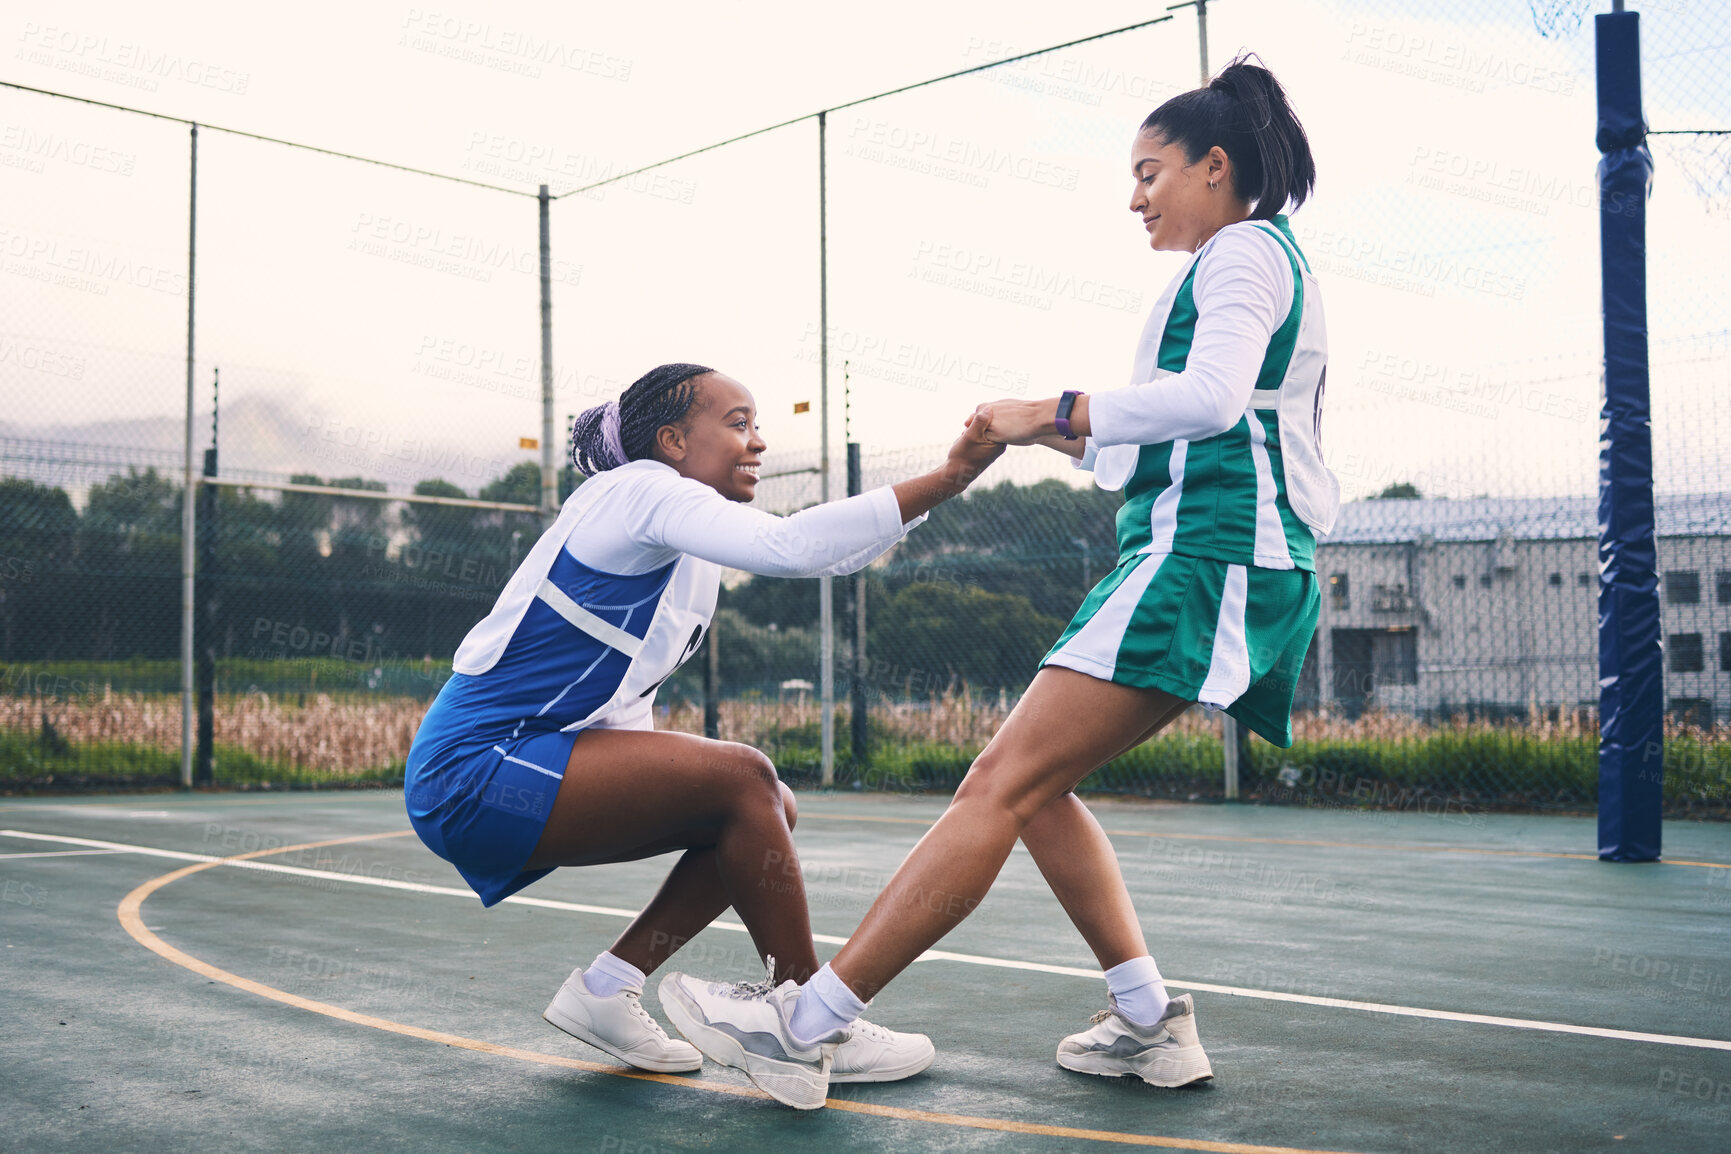 Buy stock photo Netball help, support and outdoor game of team sports with fitness and exercise. Helping, sportsmanship and student women with teamwork and collaboration in a sport competition with happiness